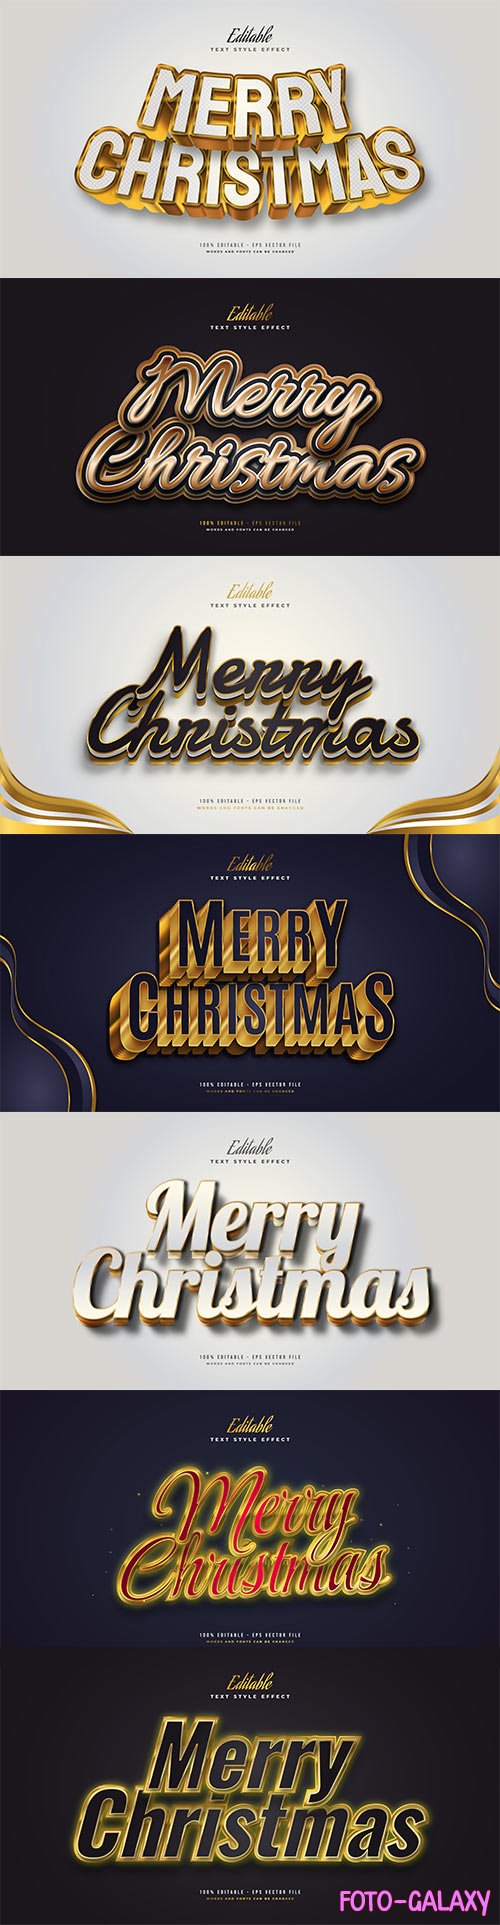 Merry christmas and happy new year 2022 editable vector text effects vol 21